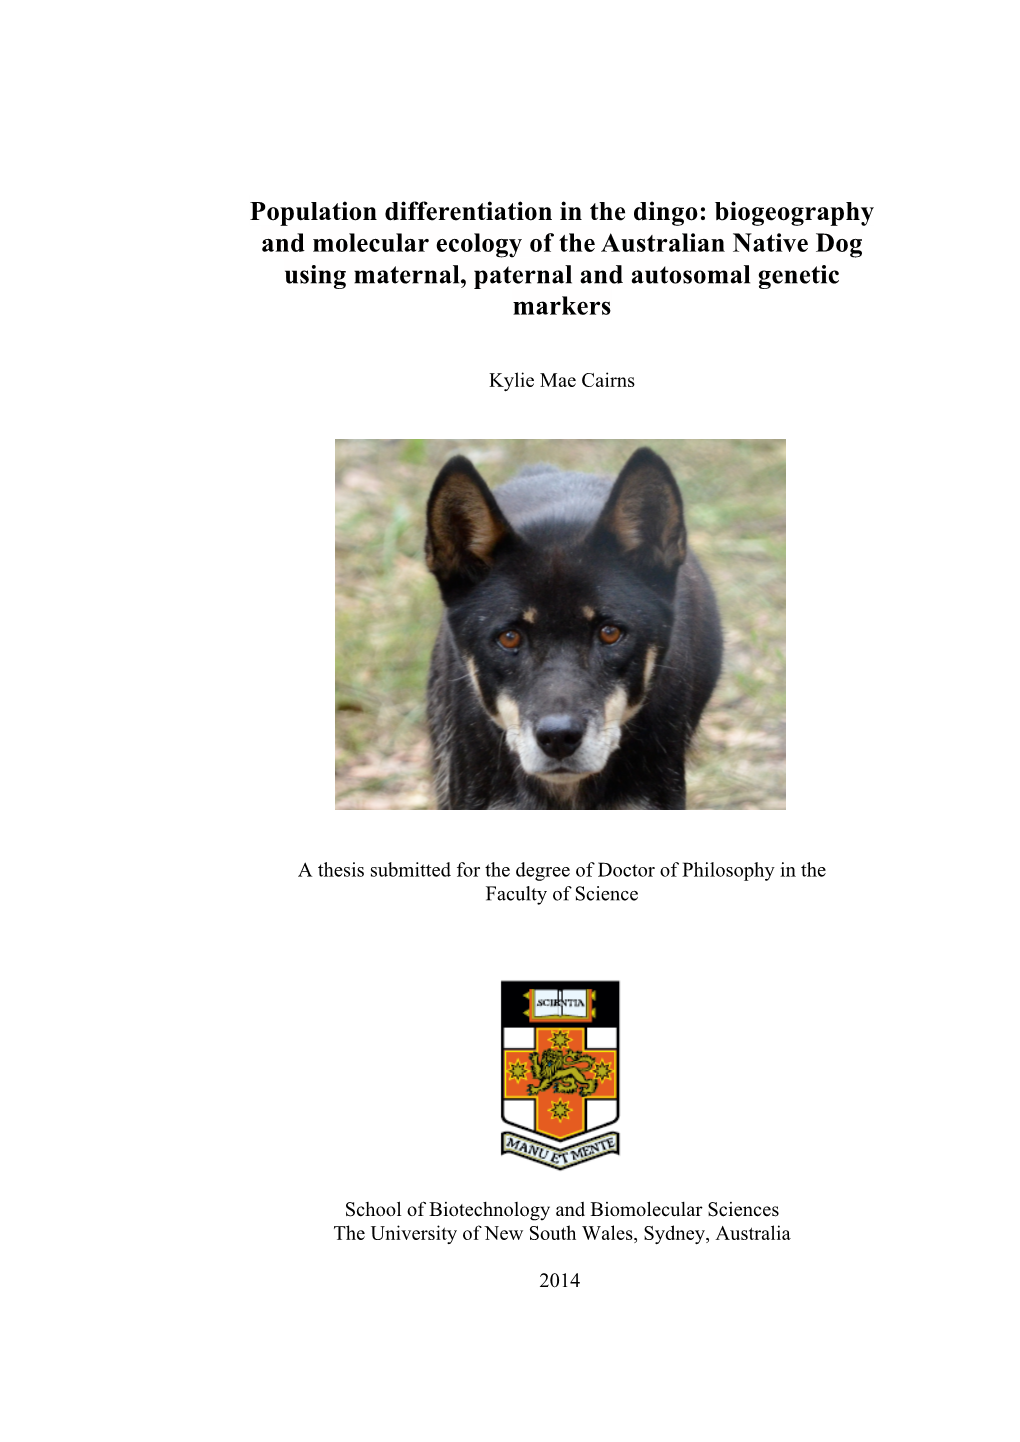 Population Differentiation in the Dingo: Biogeography and Molecular Ecology of the Australian Native Dog Using Maternal, Paternal and Autosomal Genetic Markers